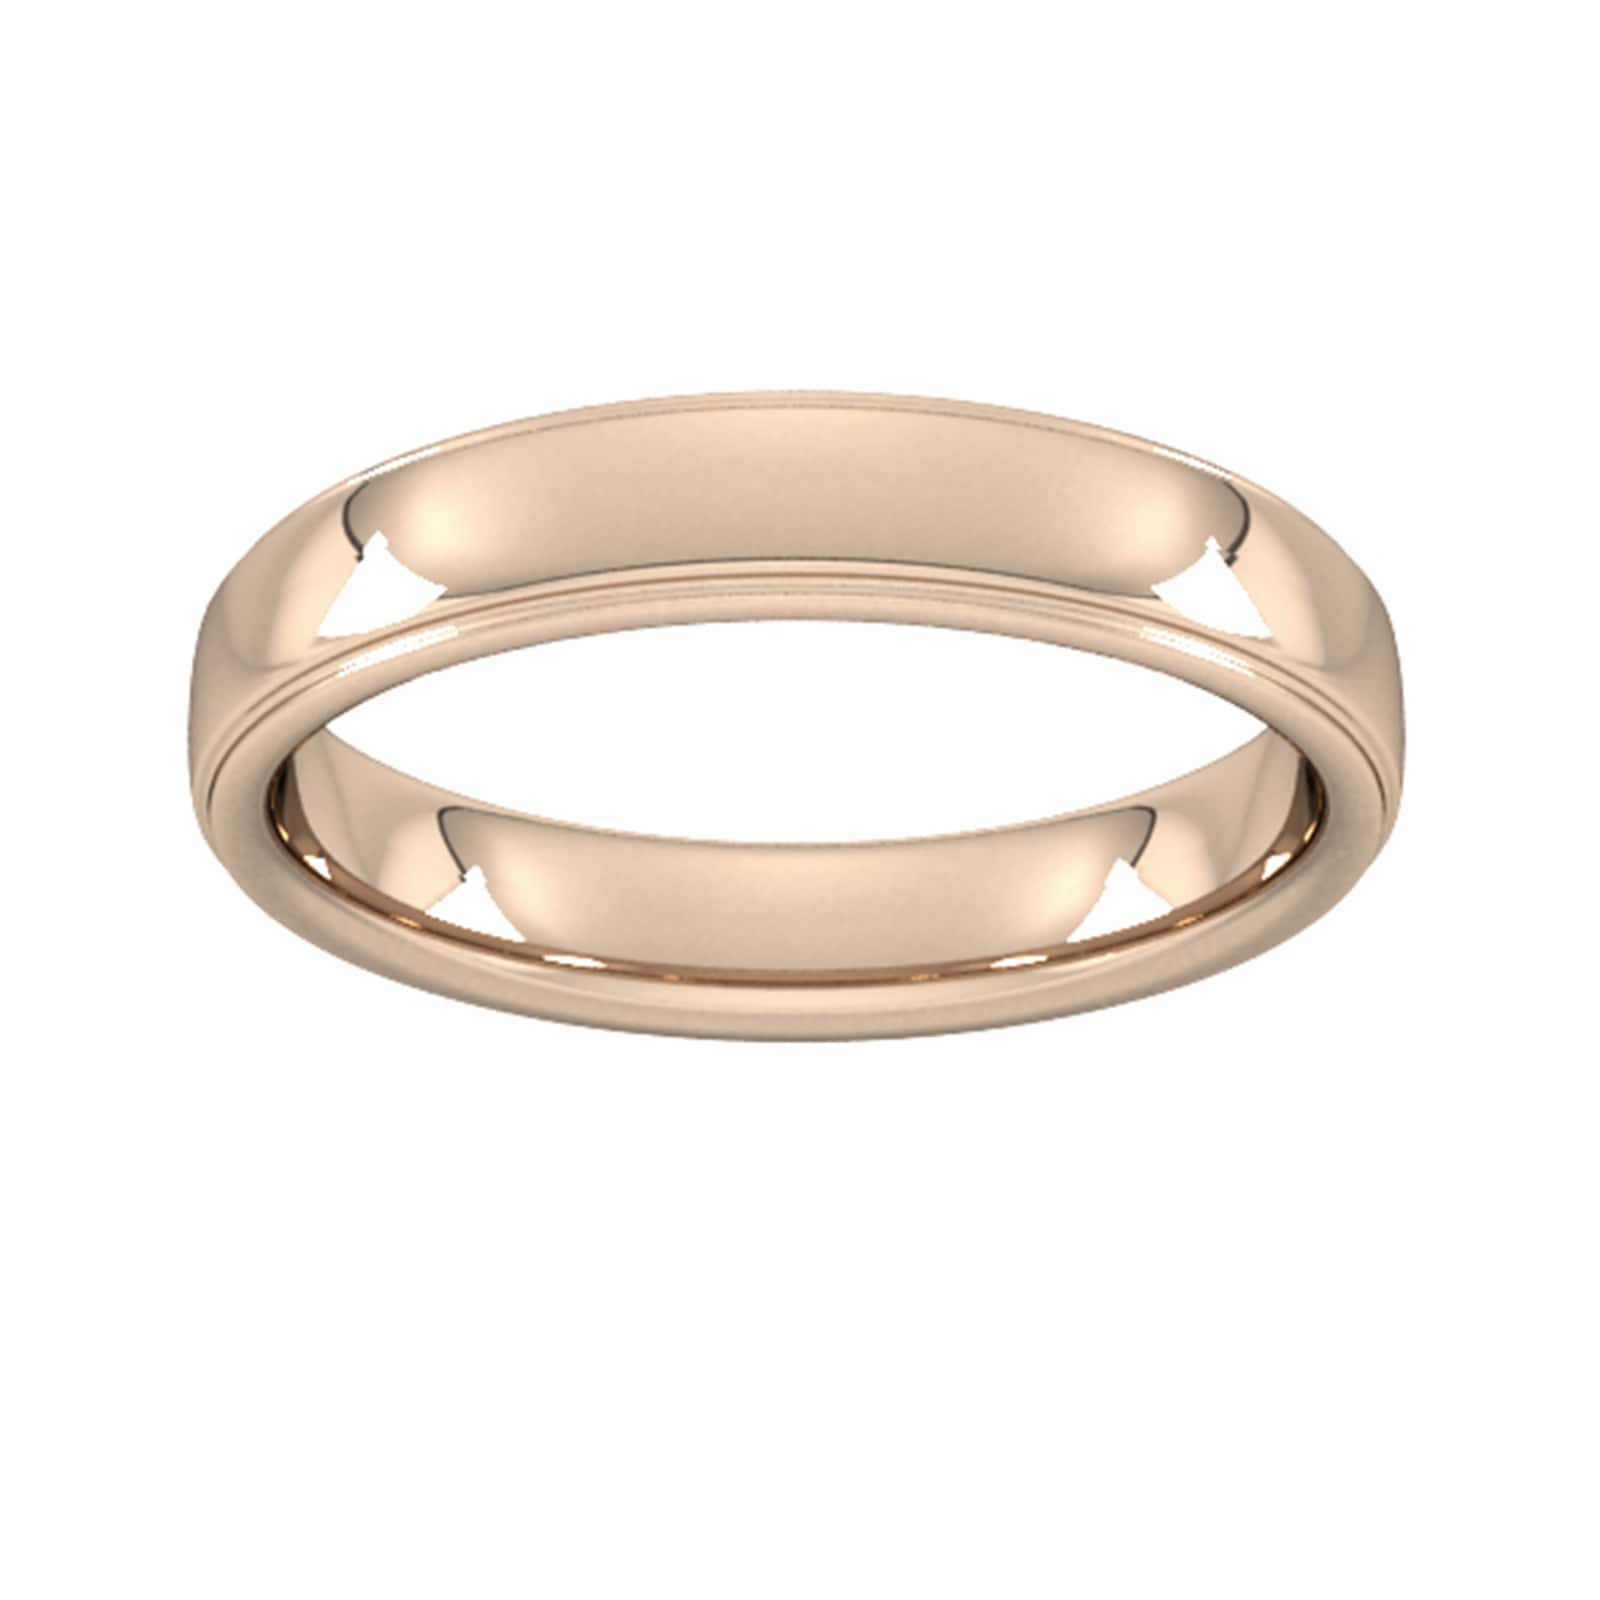 4mm Slight Court Standard Polished Finish With Grooves Wedding Ring In 18 Carat Rose Gold - Ring Size H